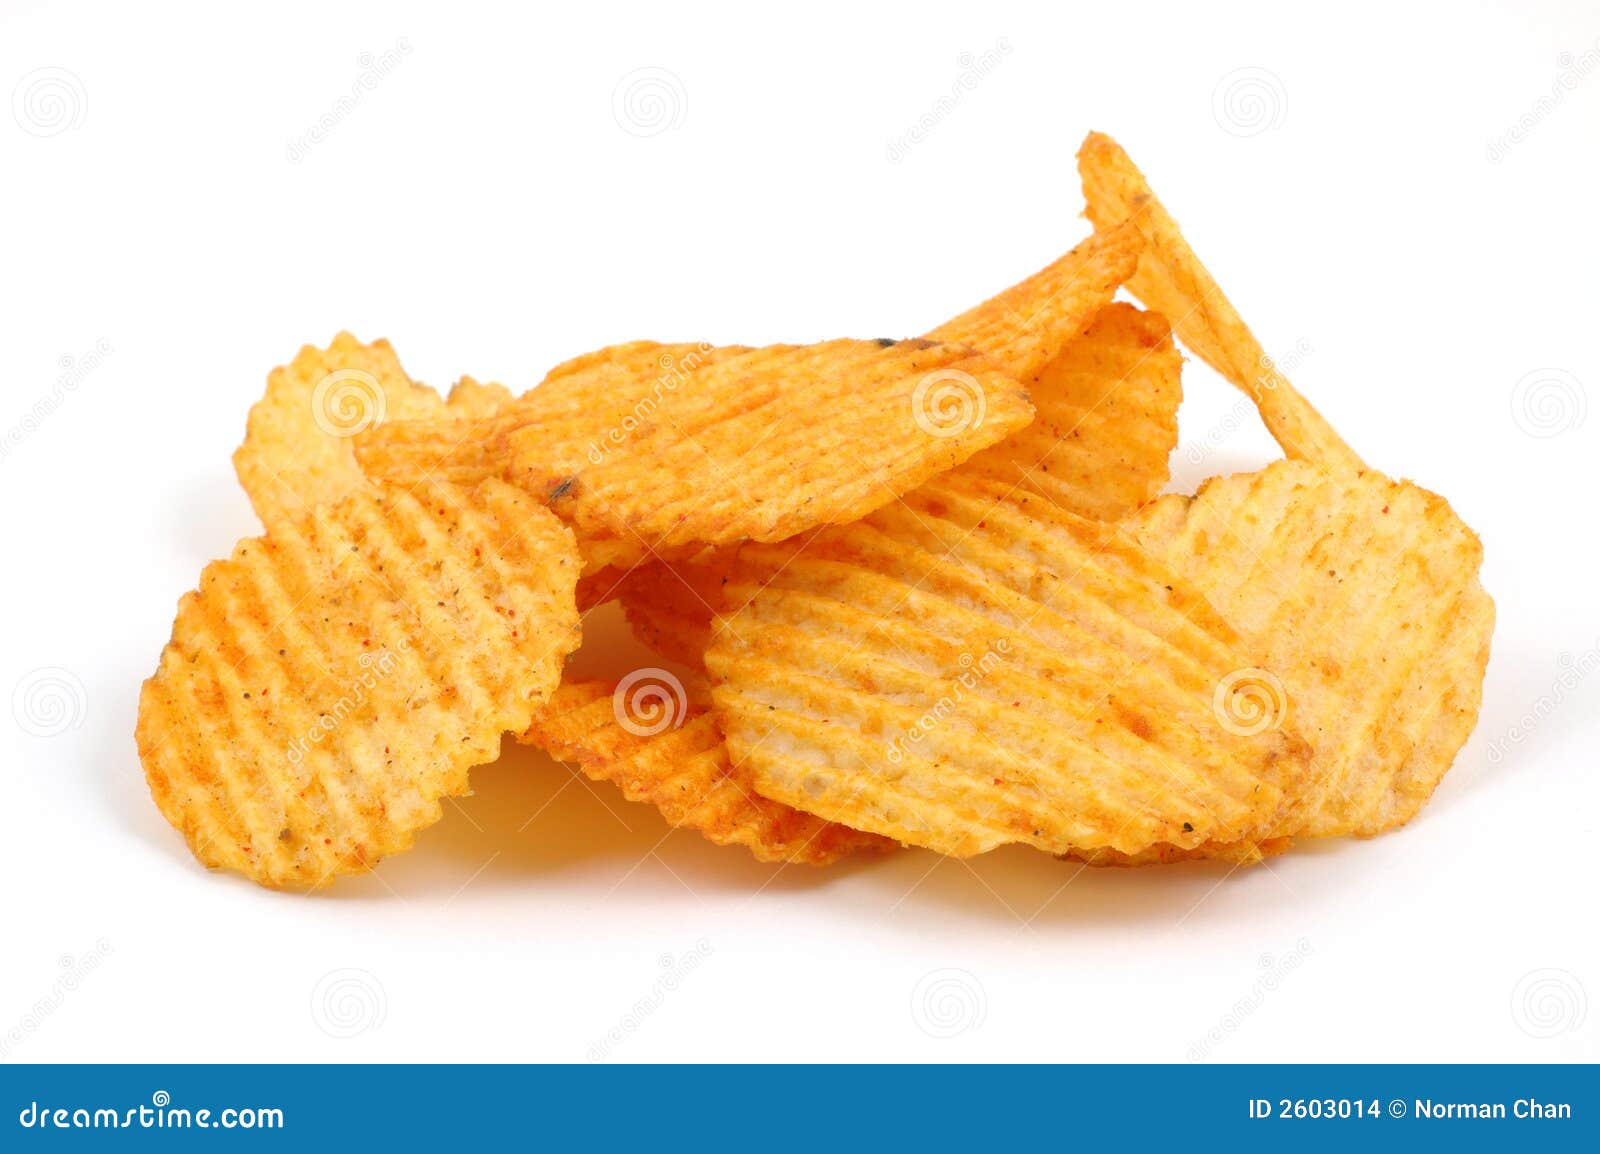 https://thumbs.dreamstime.com/z/pile-spicy-potato-chips-2603014.jpg